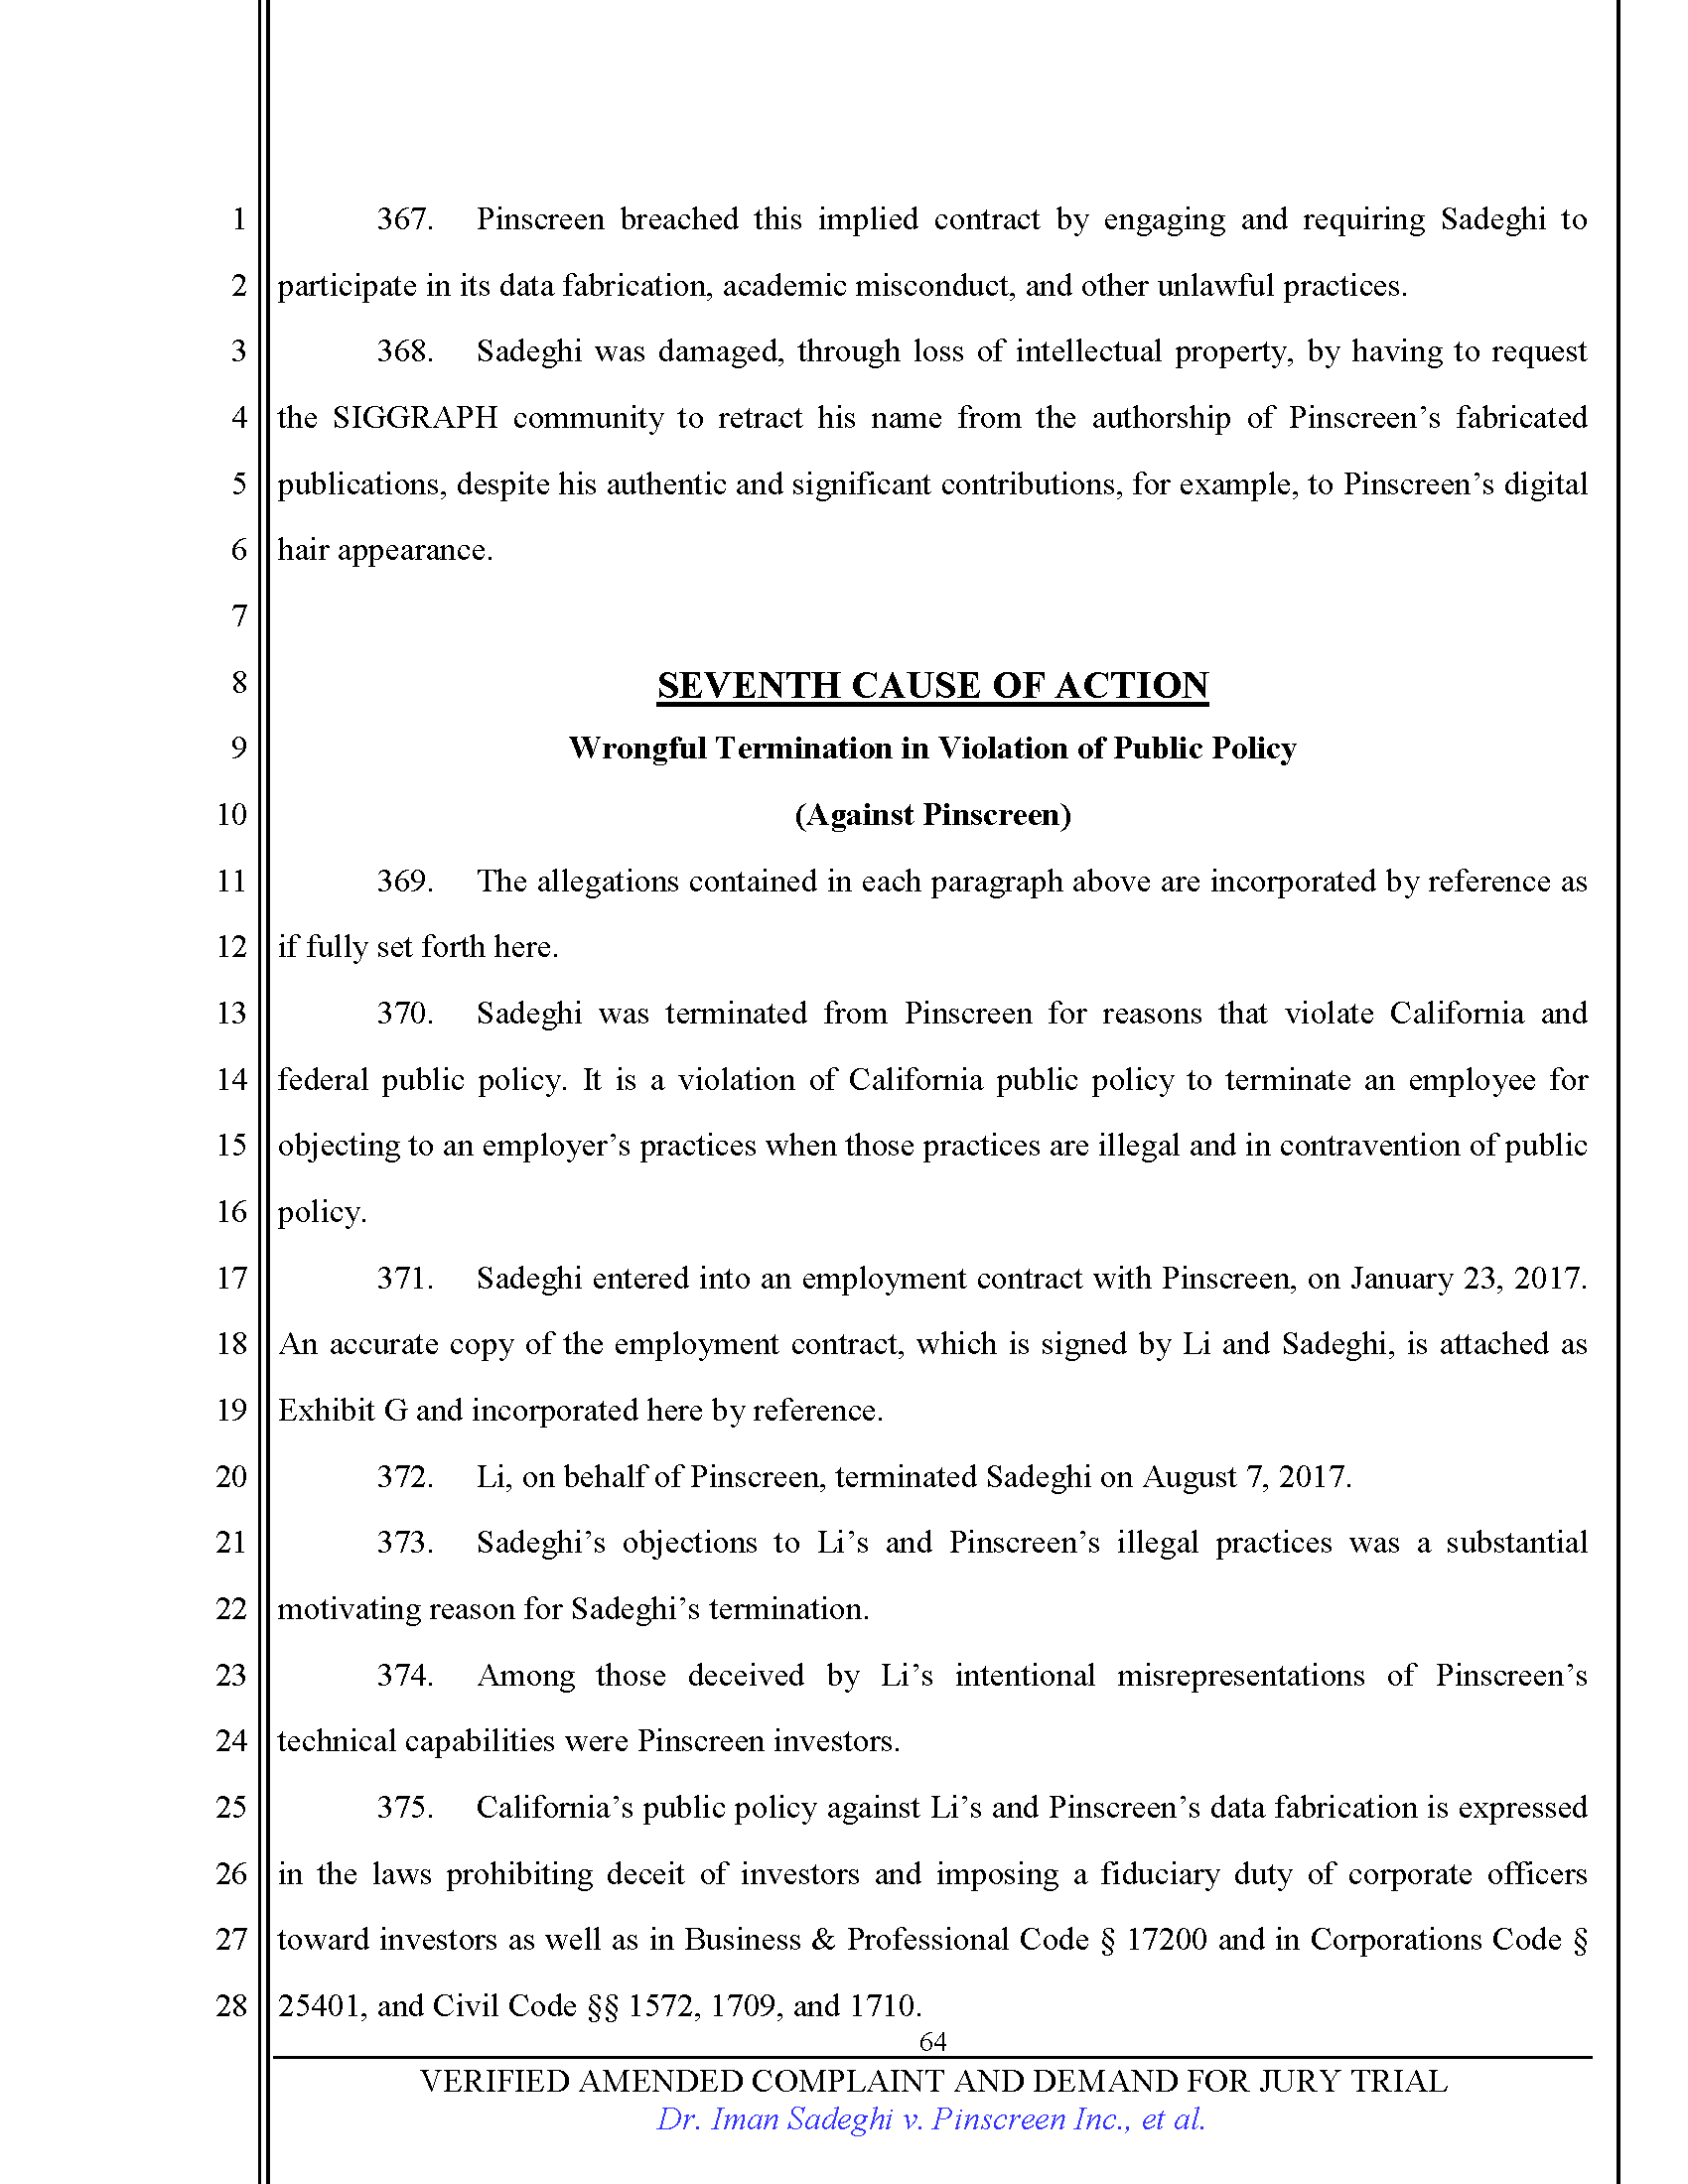 First Amended Complaint (FAC) Page 64